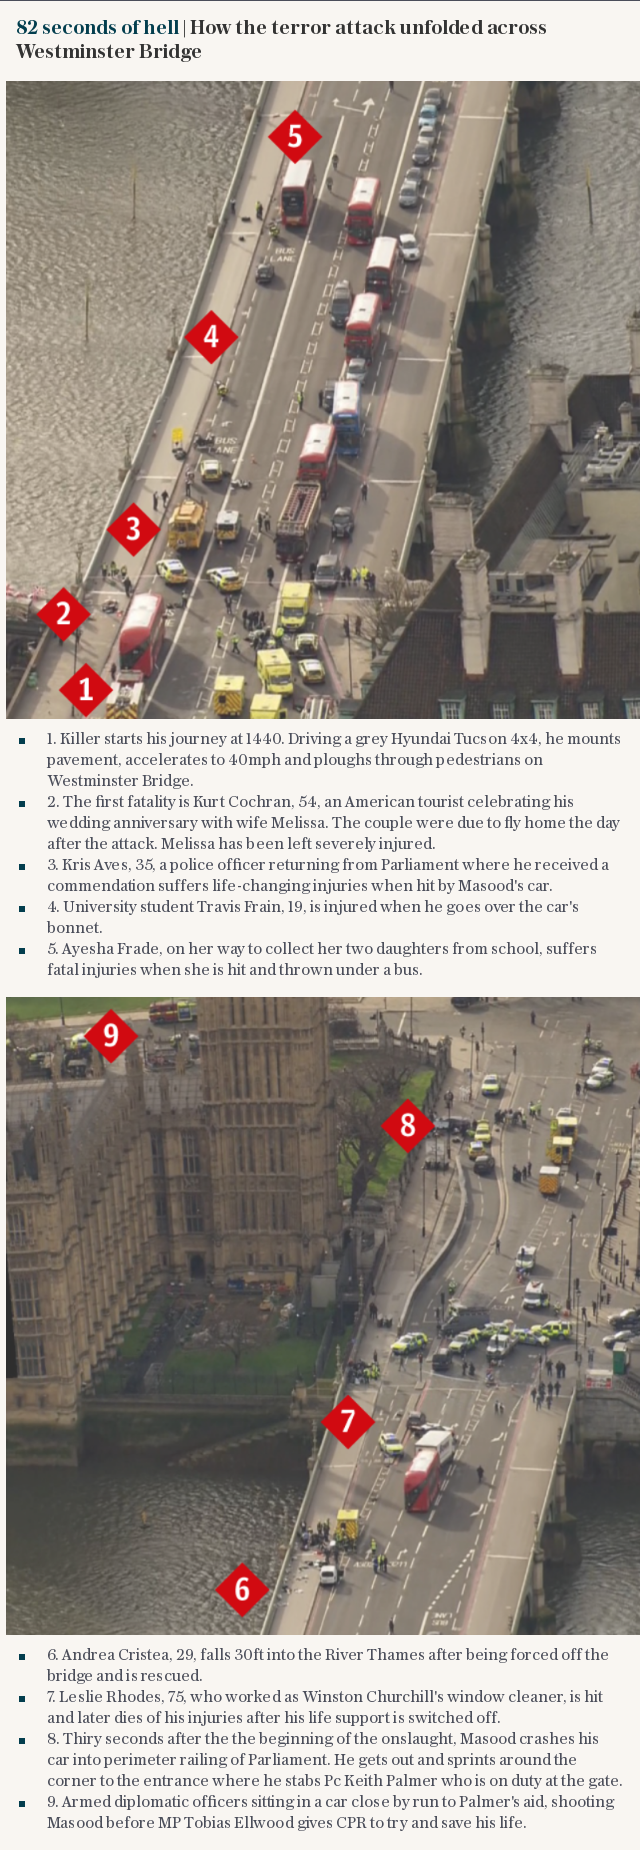 82 seconds of hell | How the terror attack unfolded across Westminster Bridge